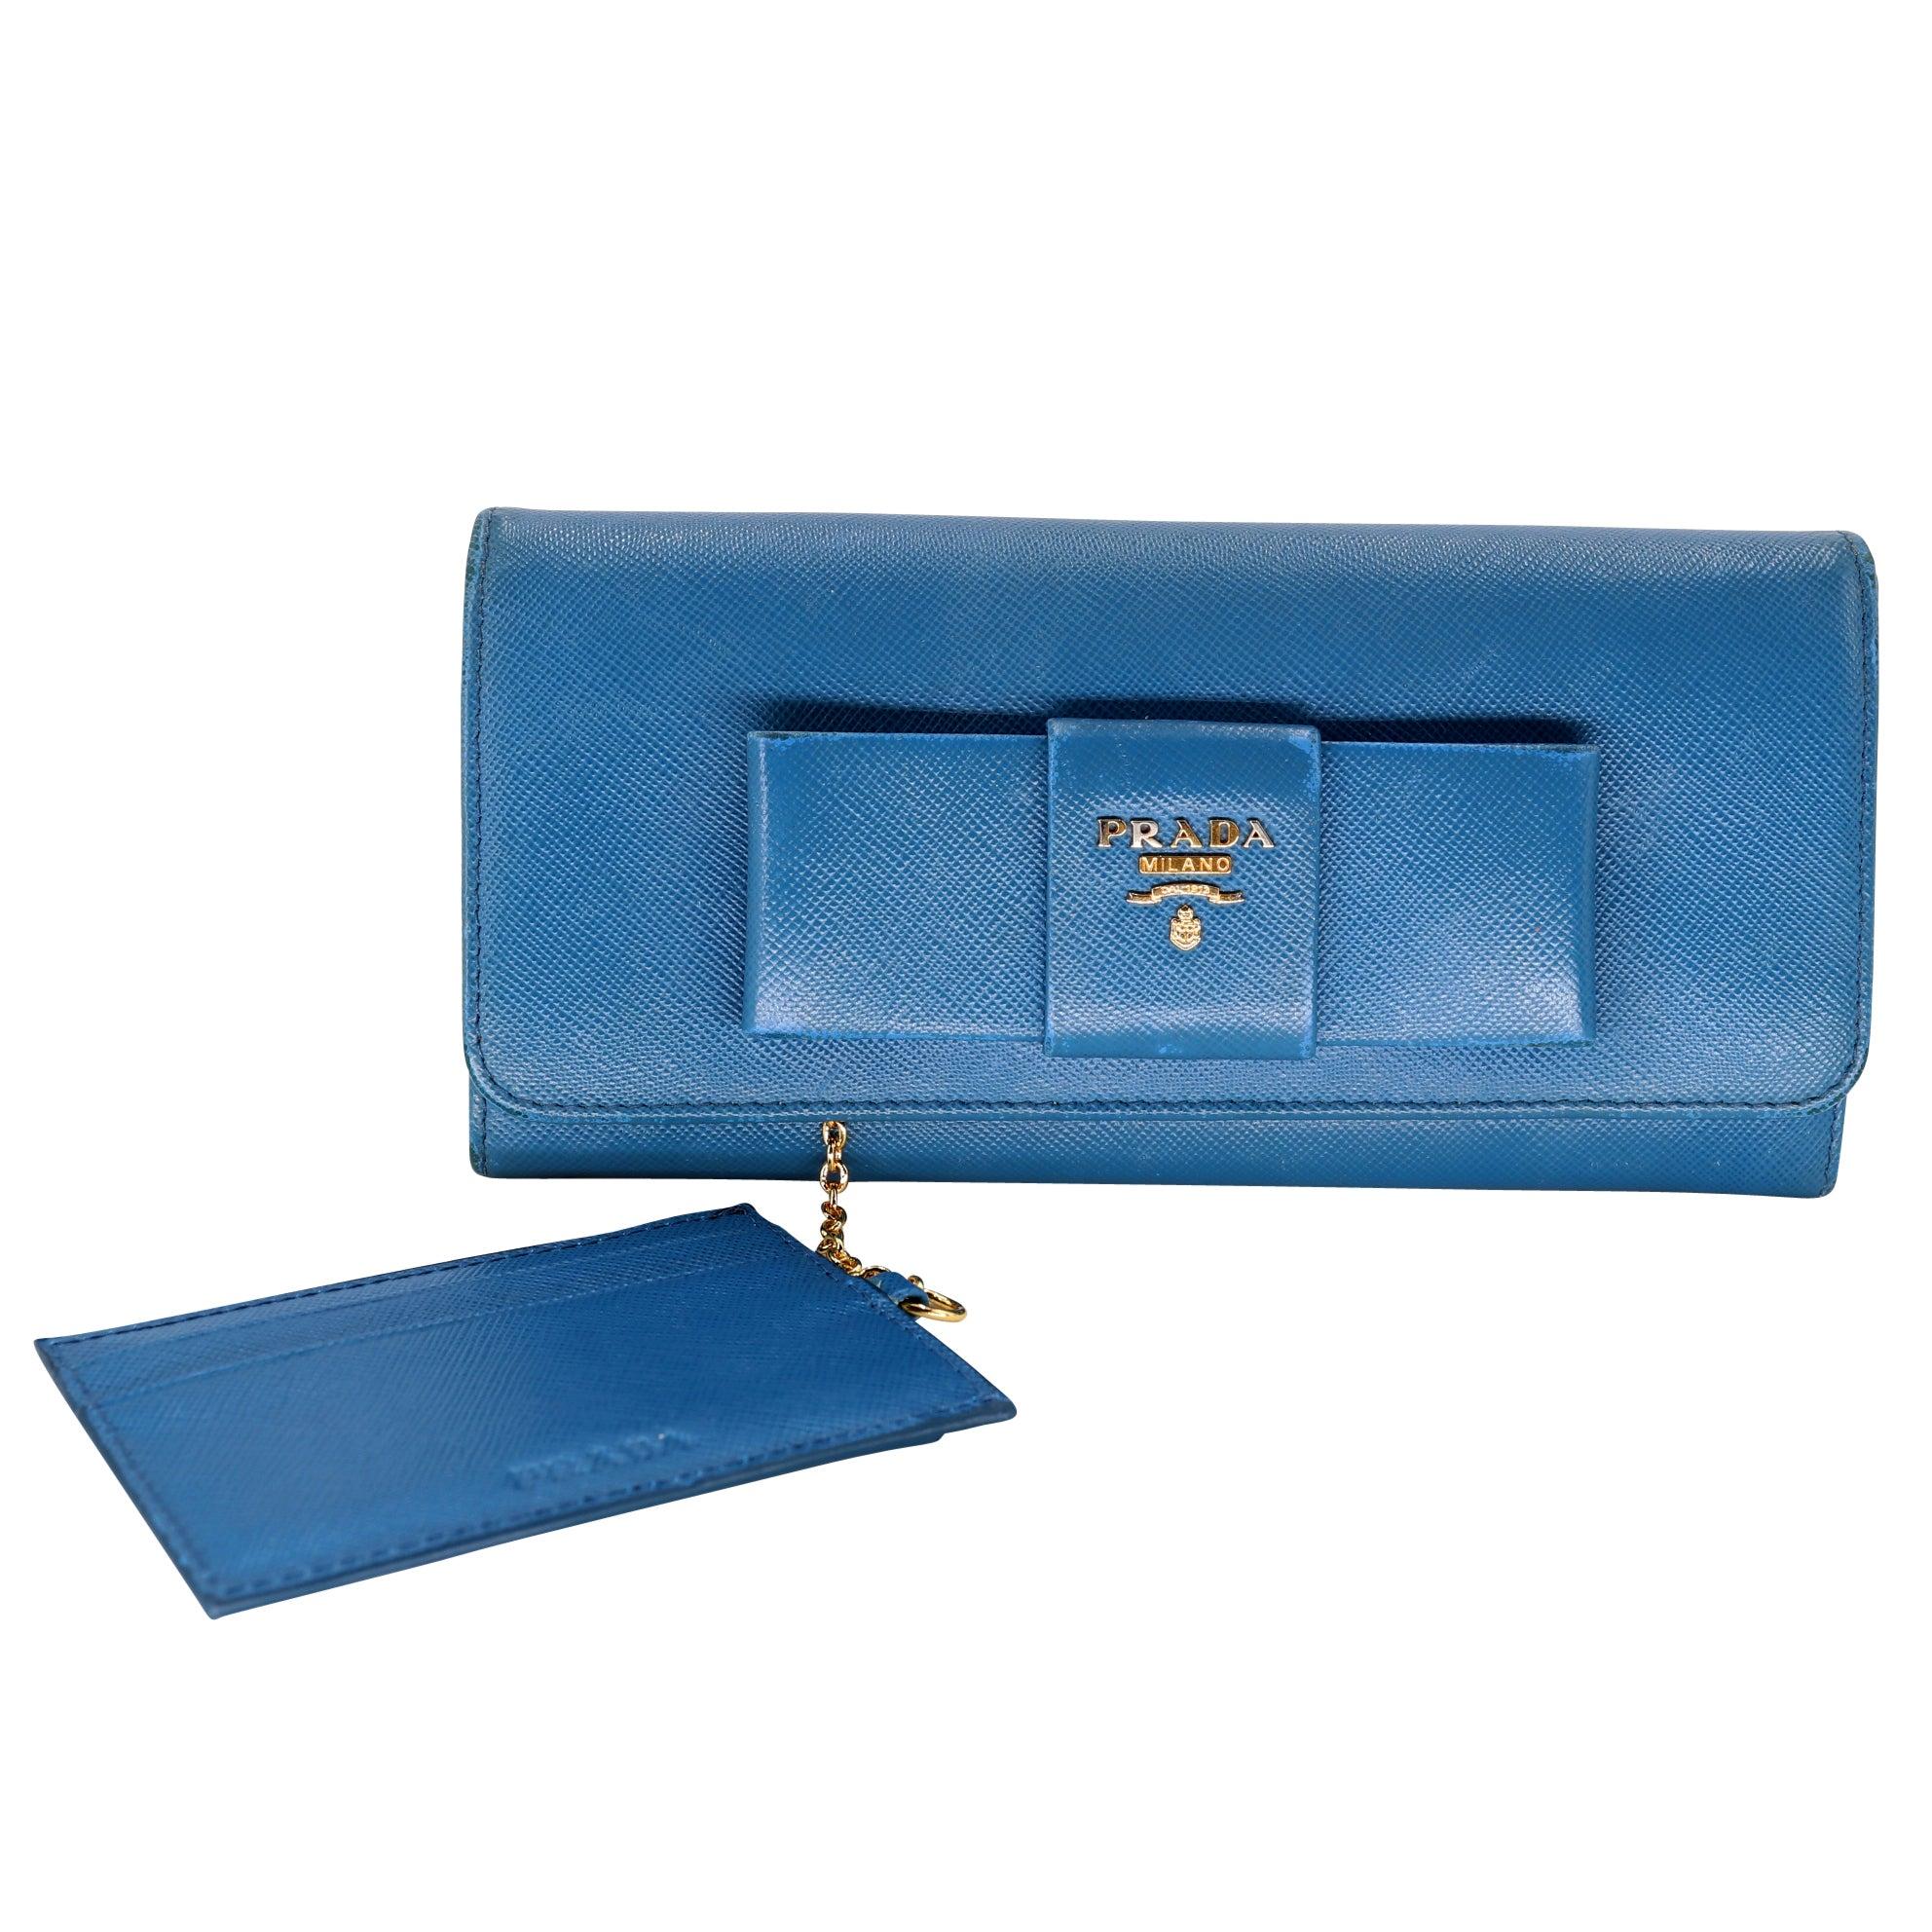 This pre-loved Prada wallet is a great addition to any purse or collection! The saffiano leather is durable and beautiful, and the gold-tone hardware adds a touch of luxury. The button lock closure keeps everything secure, provides plenty of room